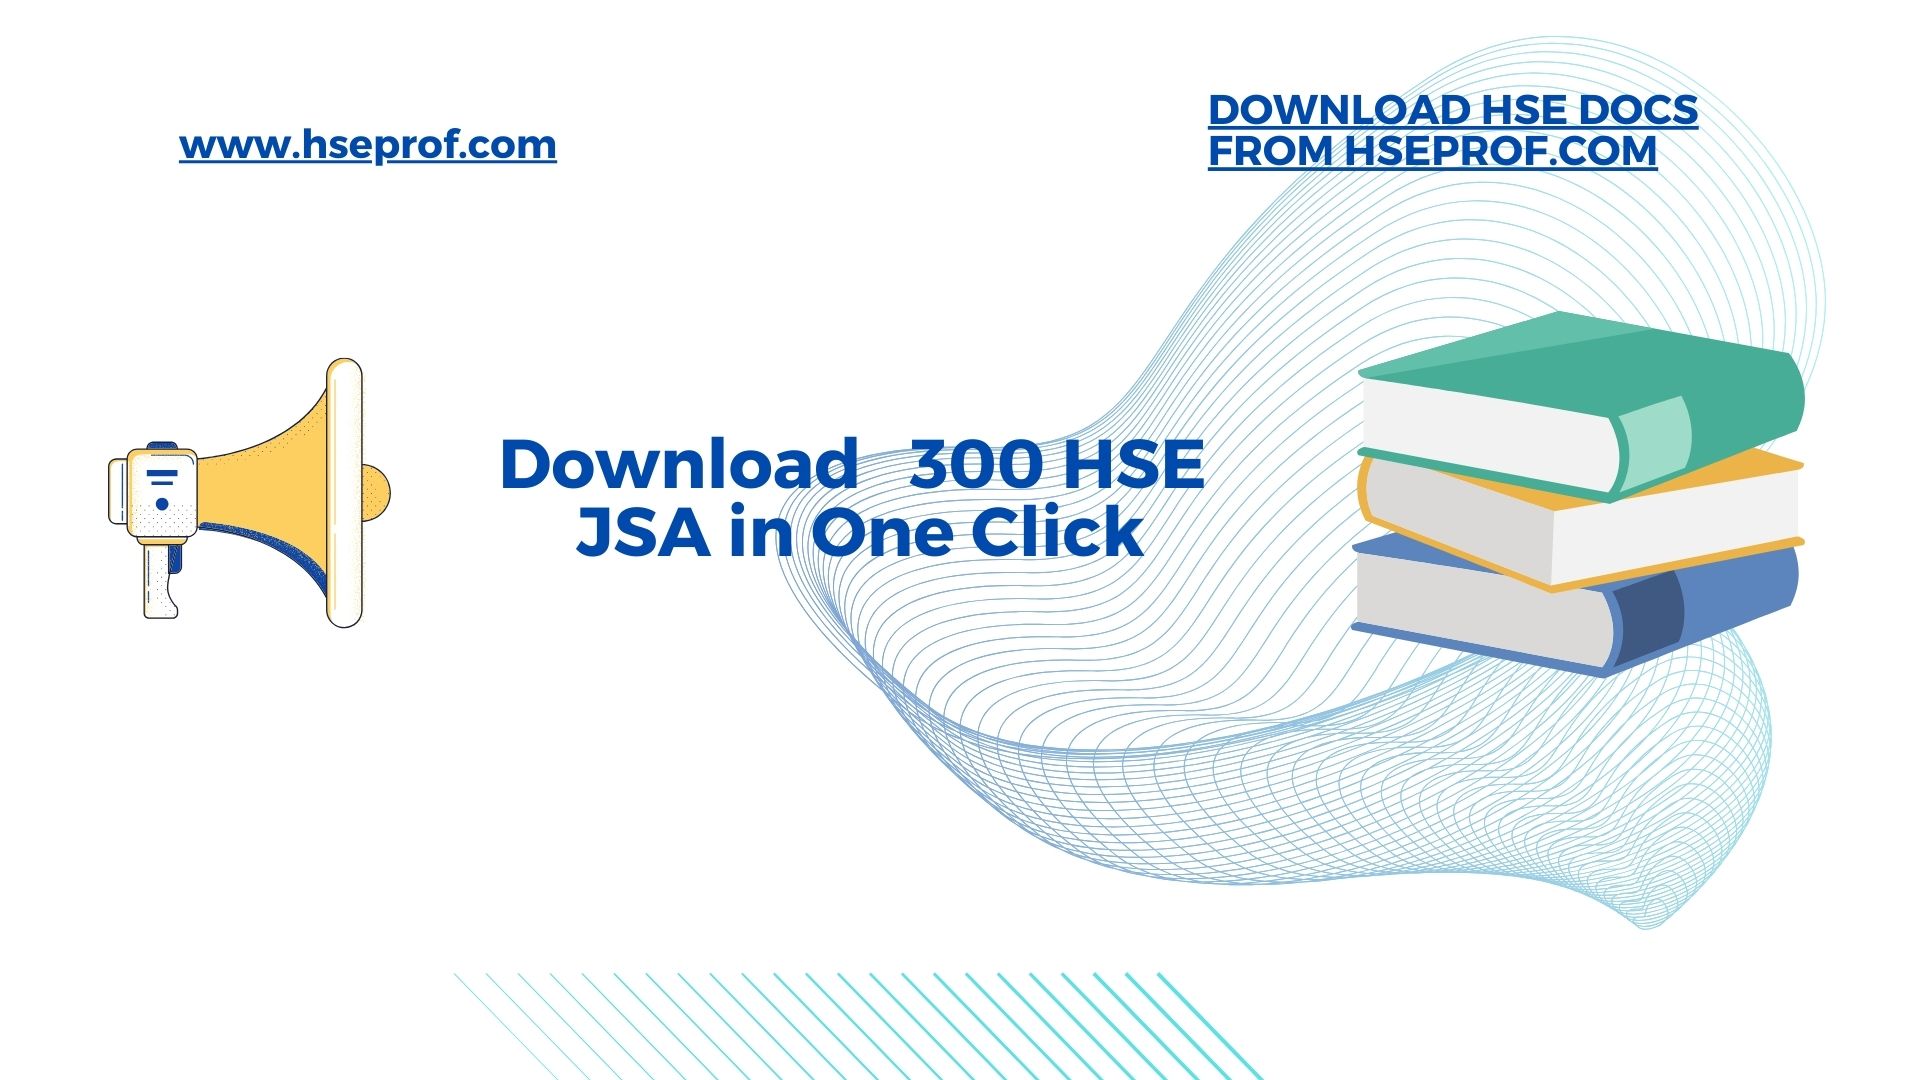 Download 300 HSE JSA in one Click HSE Docs